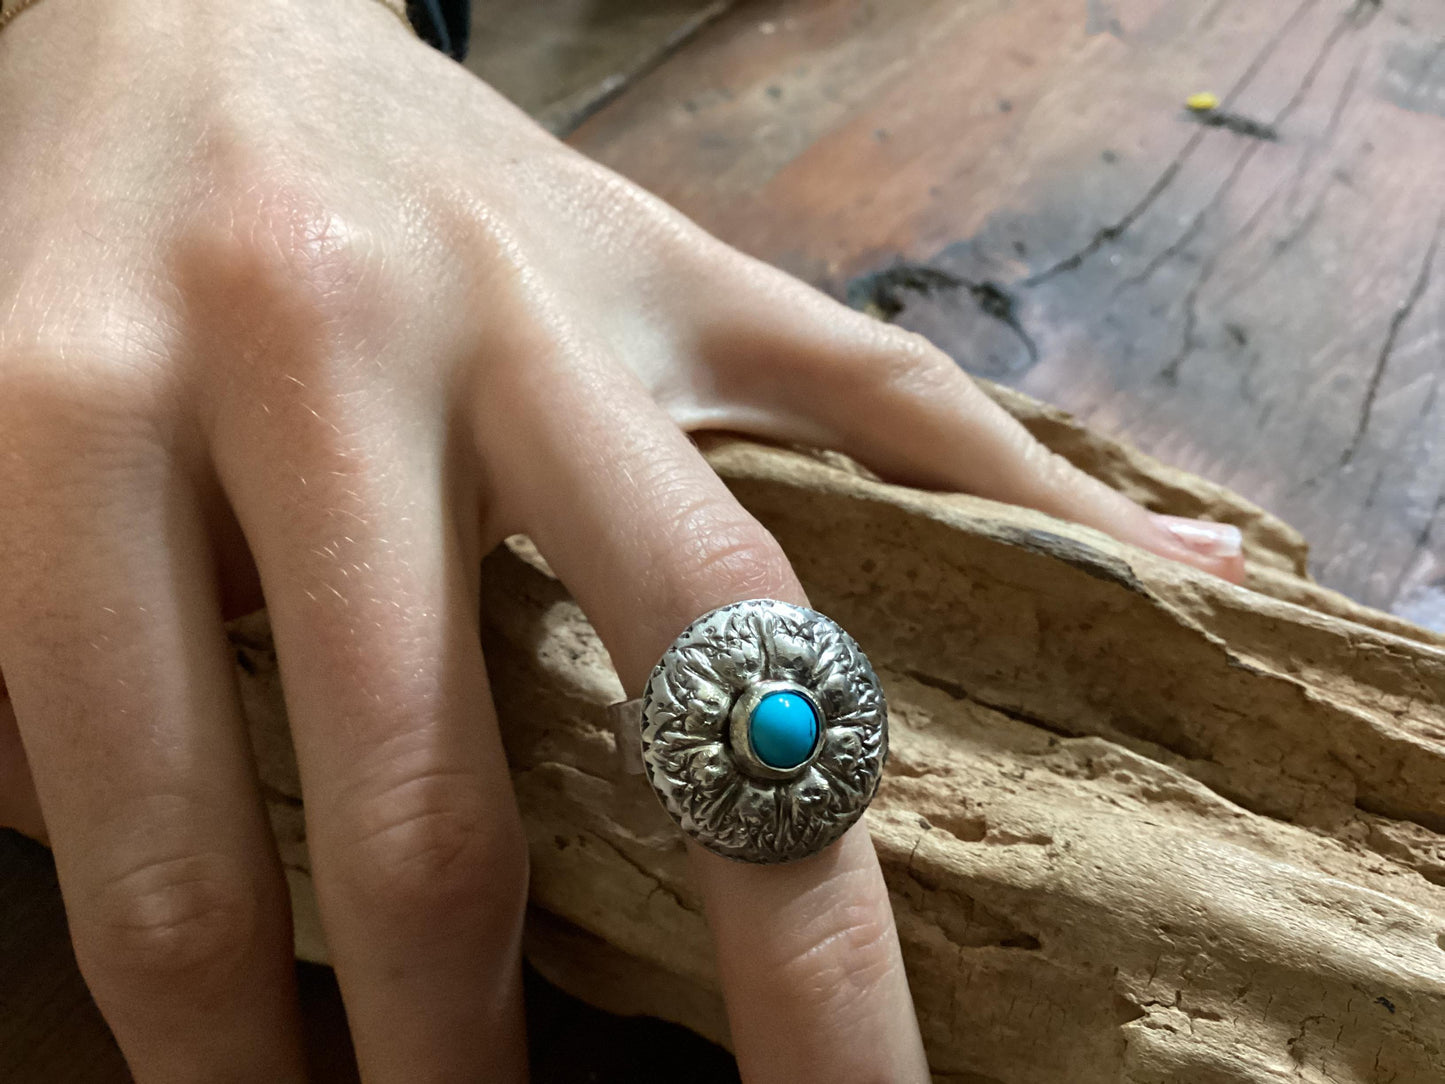 Sterling Silver and Turquoise, Art Nouveau Ring